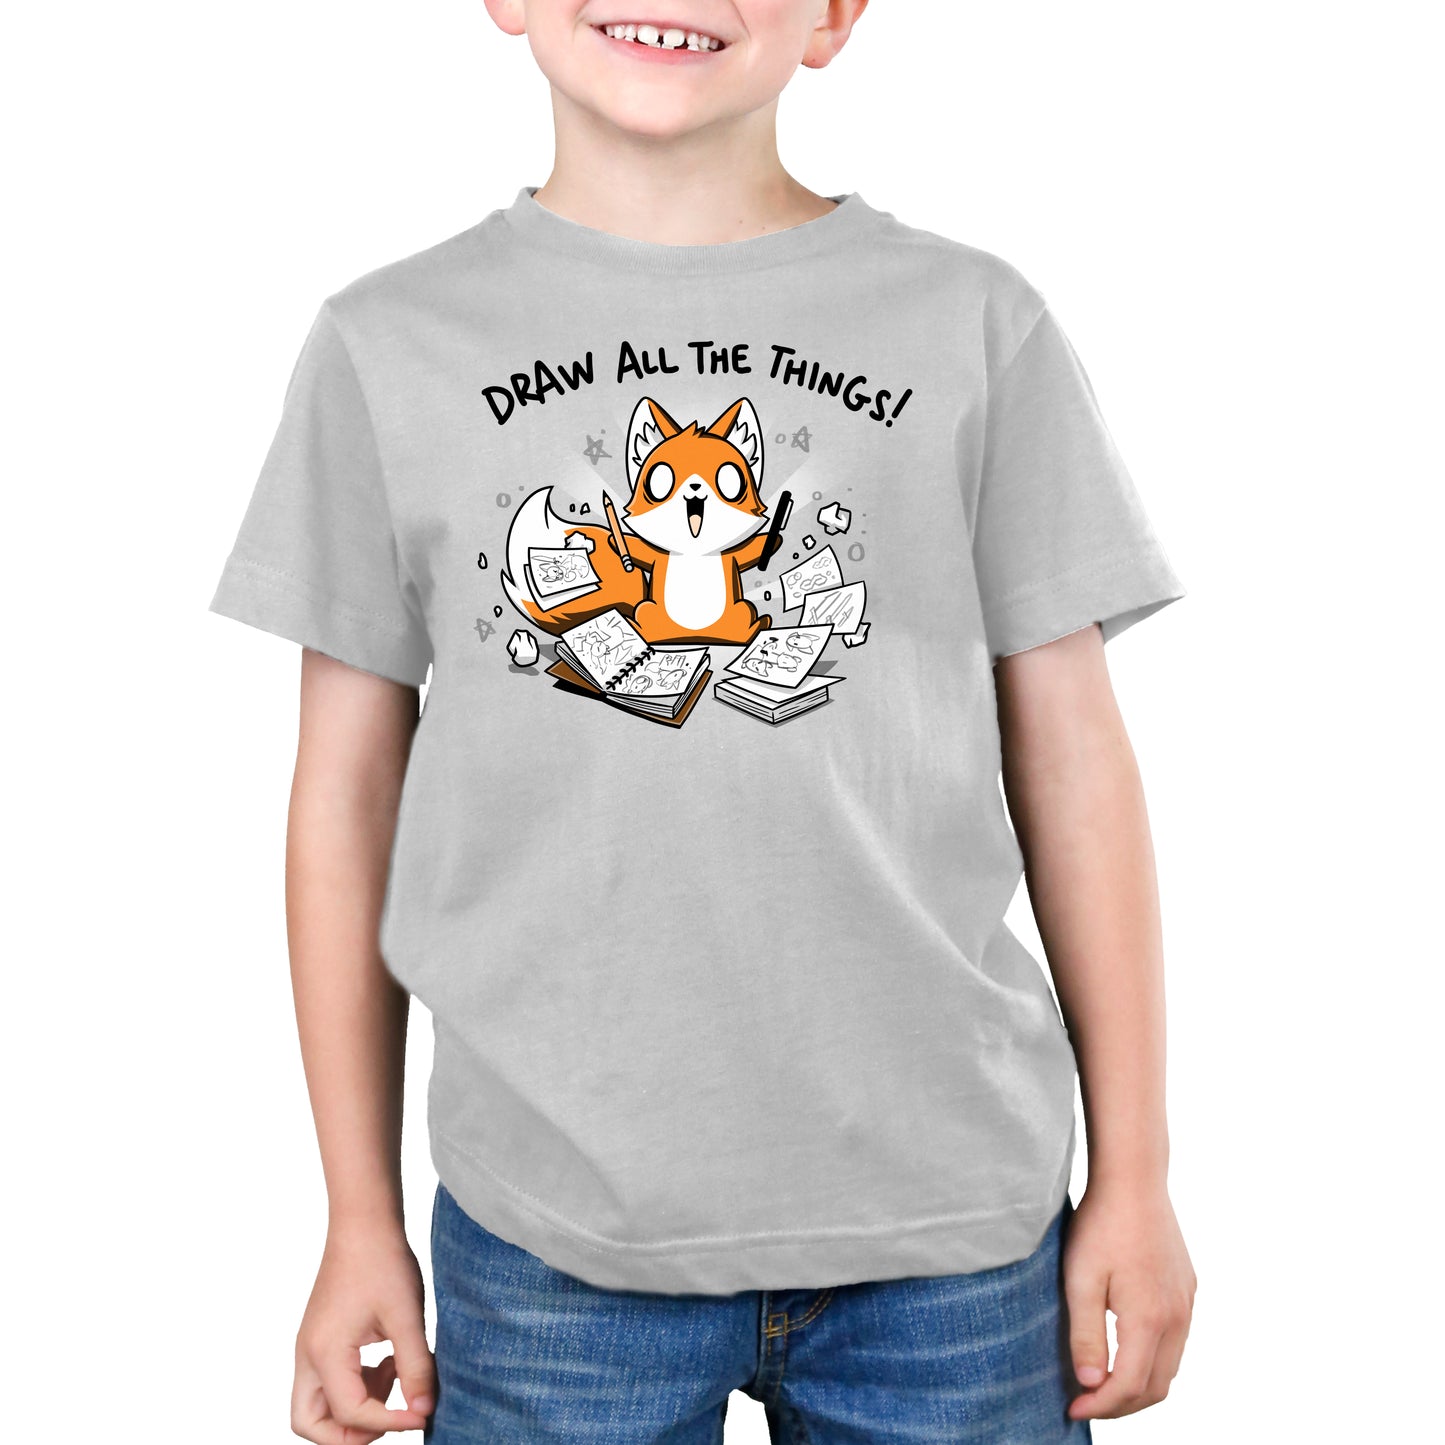 A young boy wearing a TeeTurtle T-shirt that says "Draw All the Things!